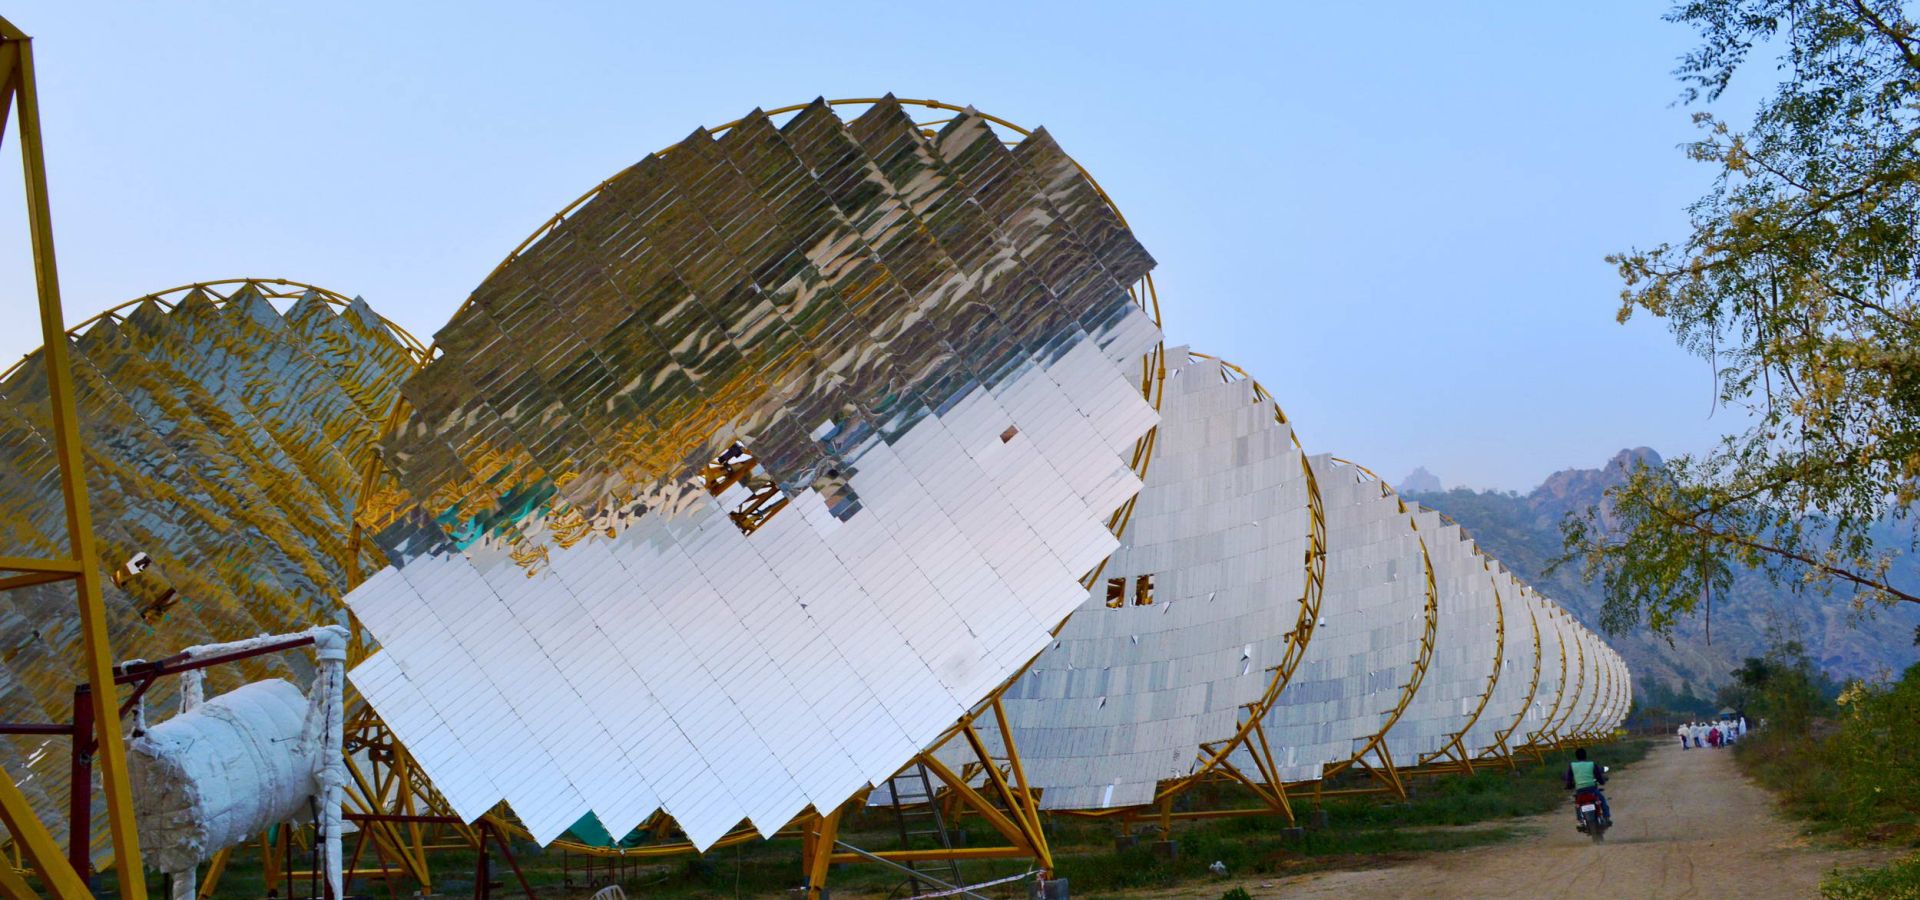 large circular solar panels from the India One solar plant, with mountains on the horizon